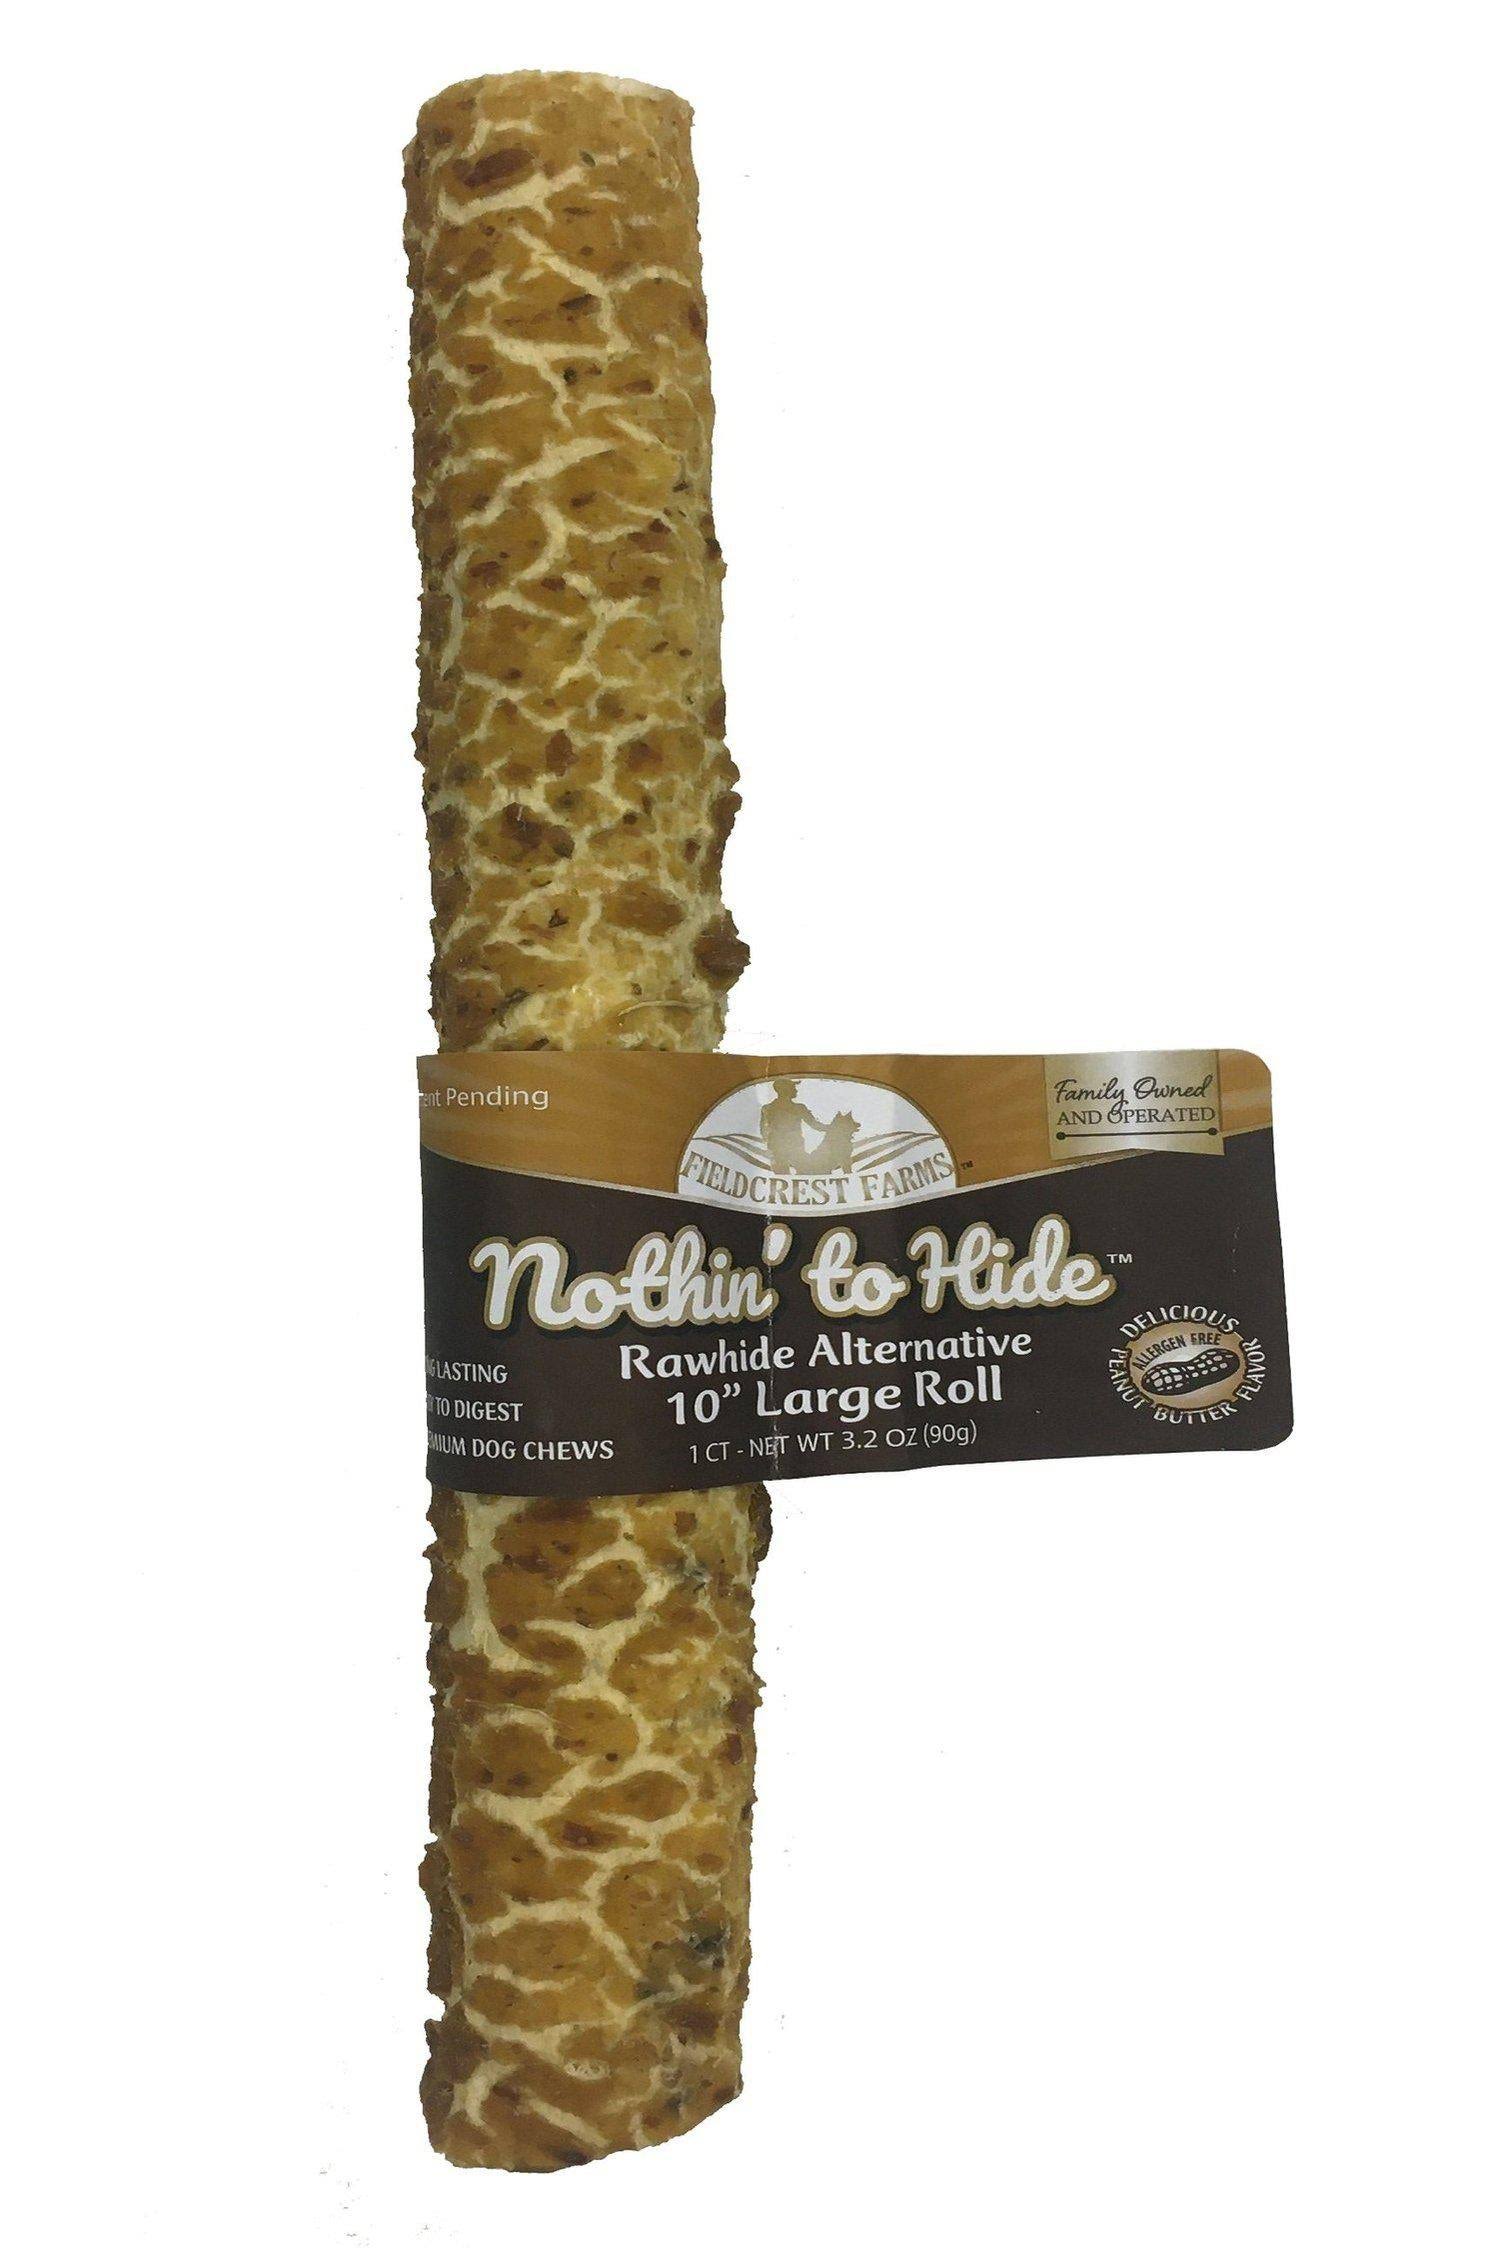 Nothin' to Hide Peanut Butter Roll Large 10"